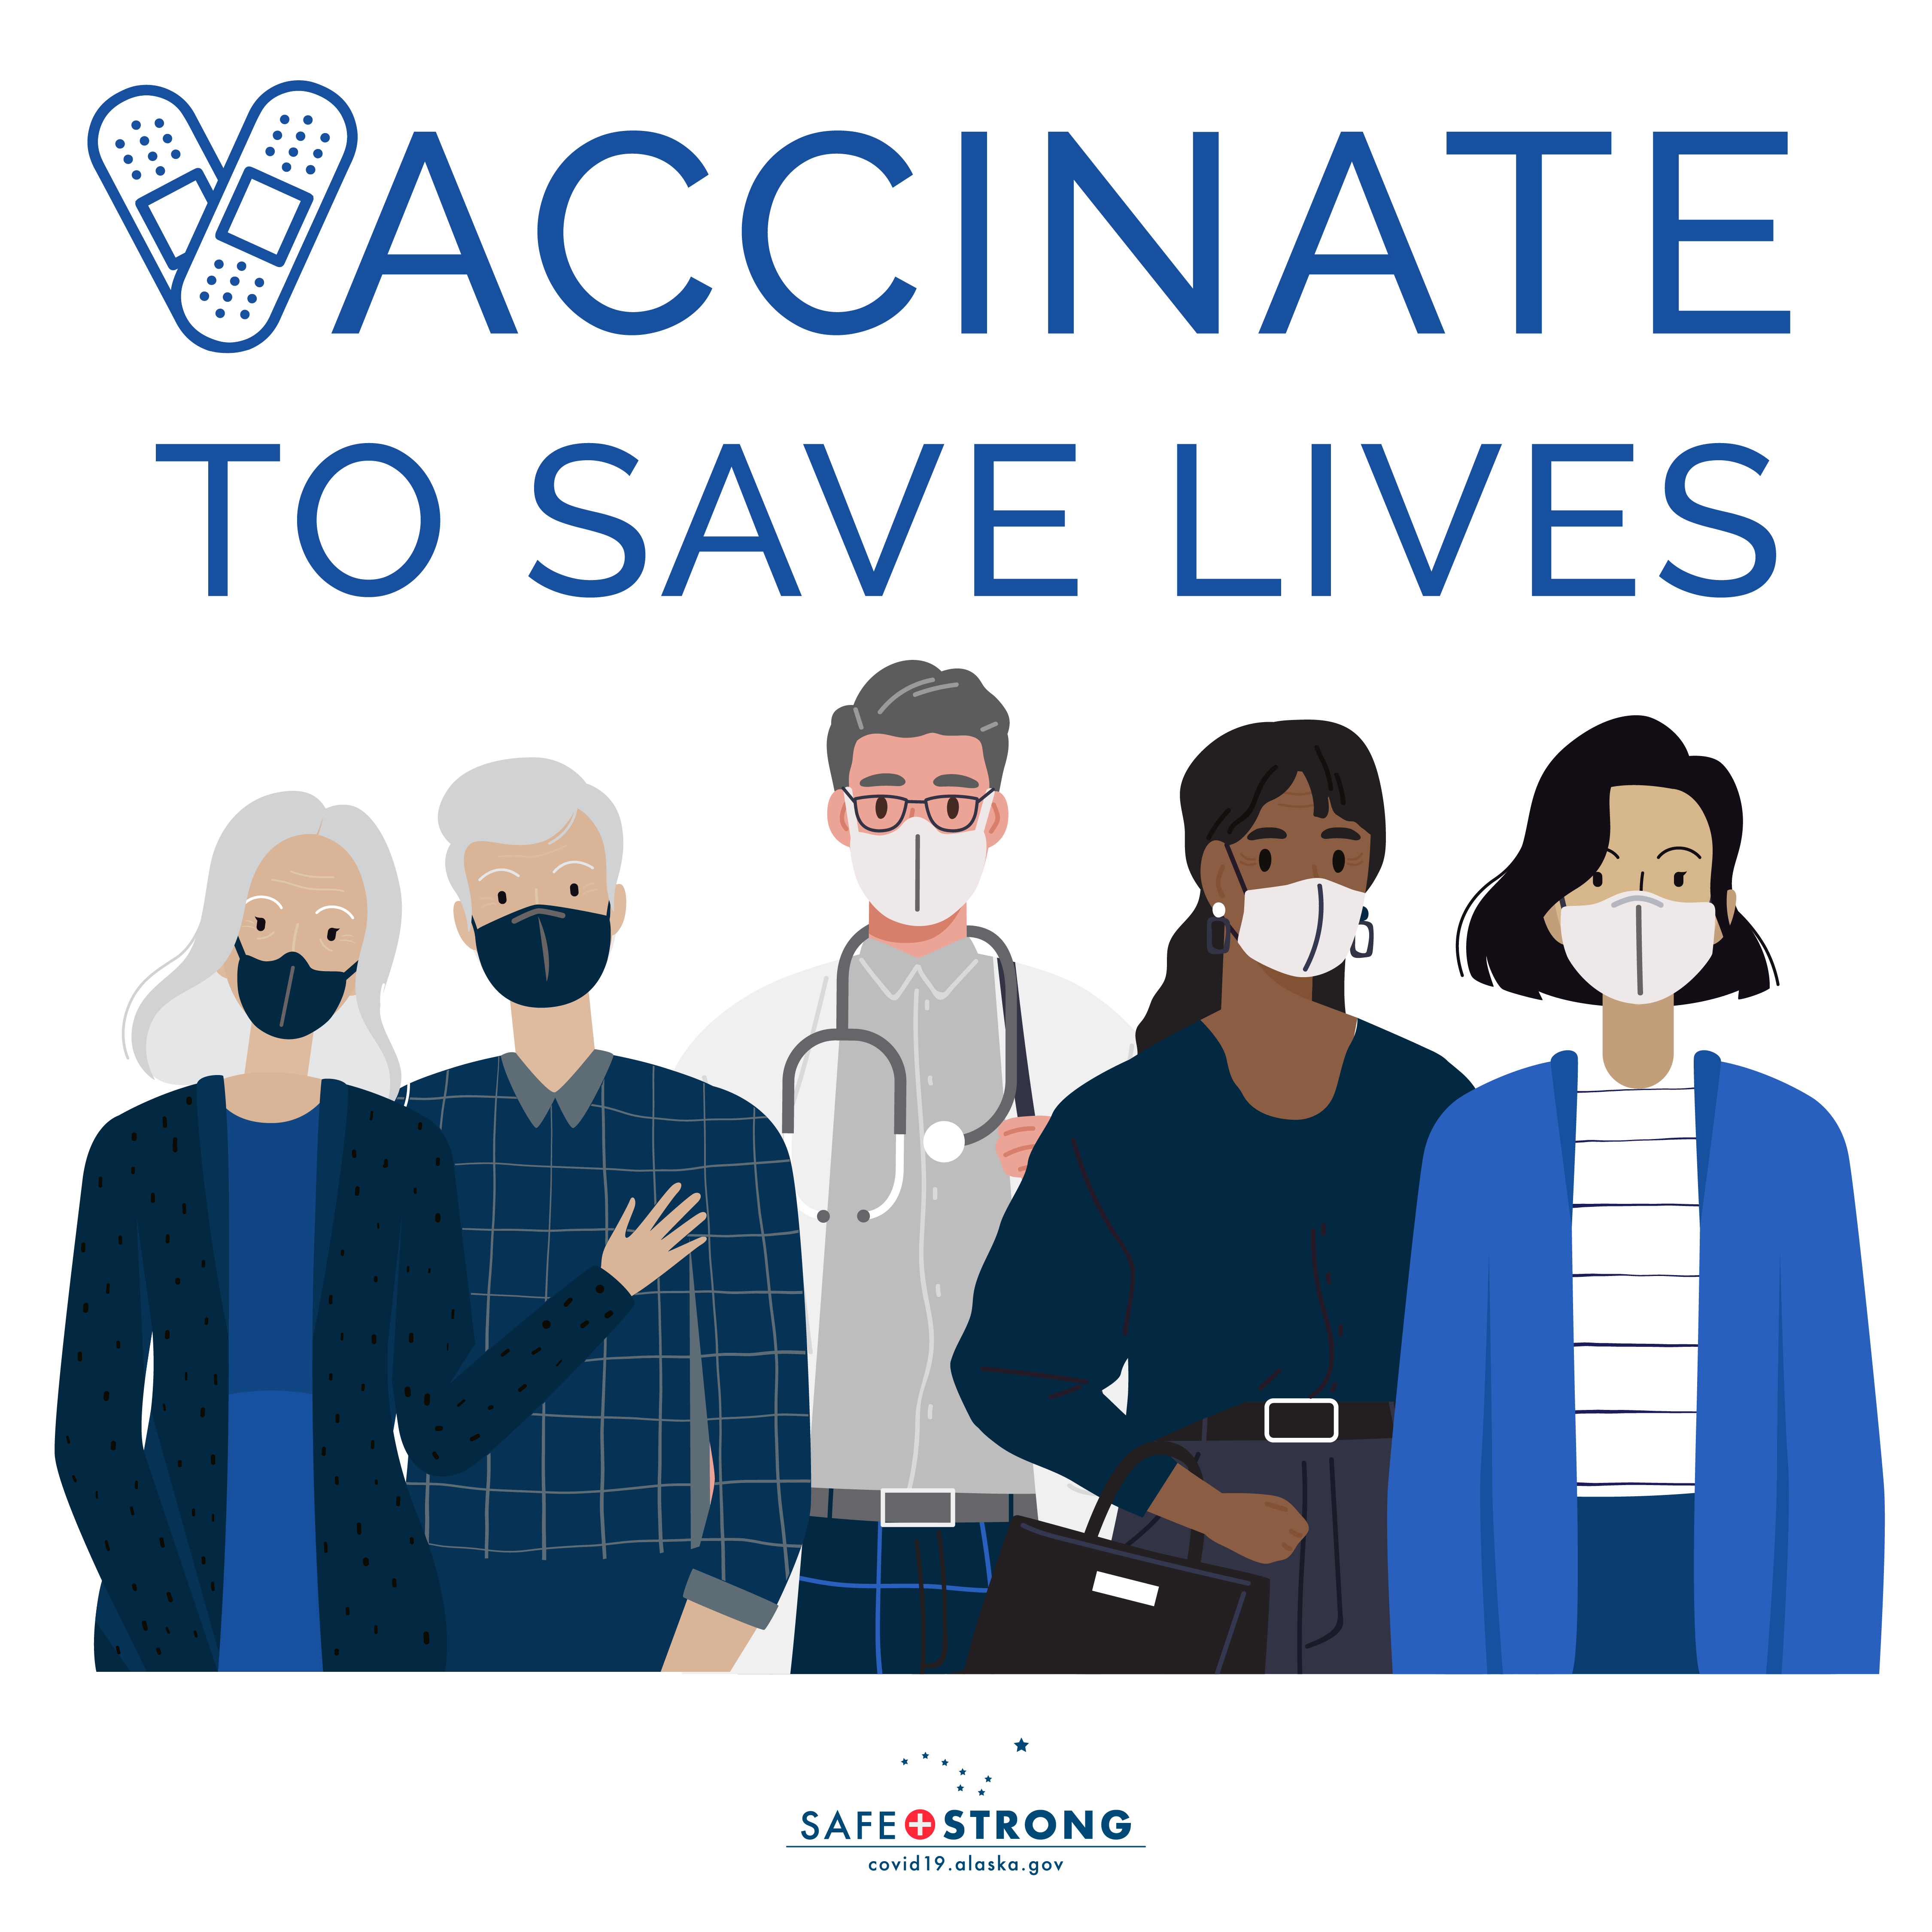 Vaccinate to save lives